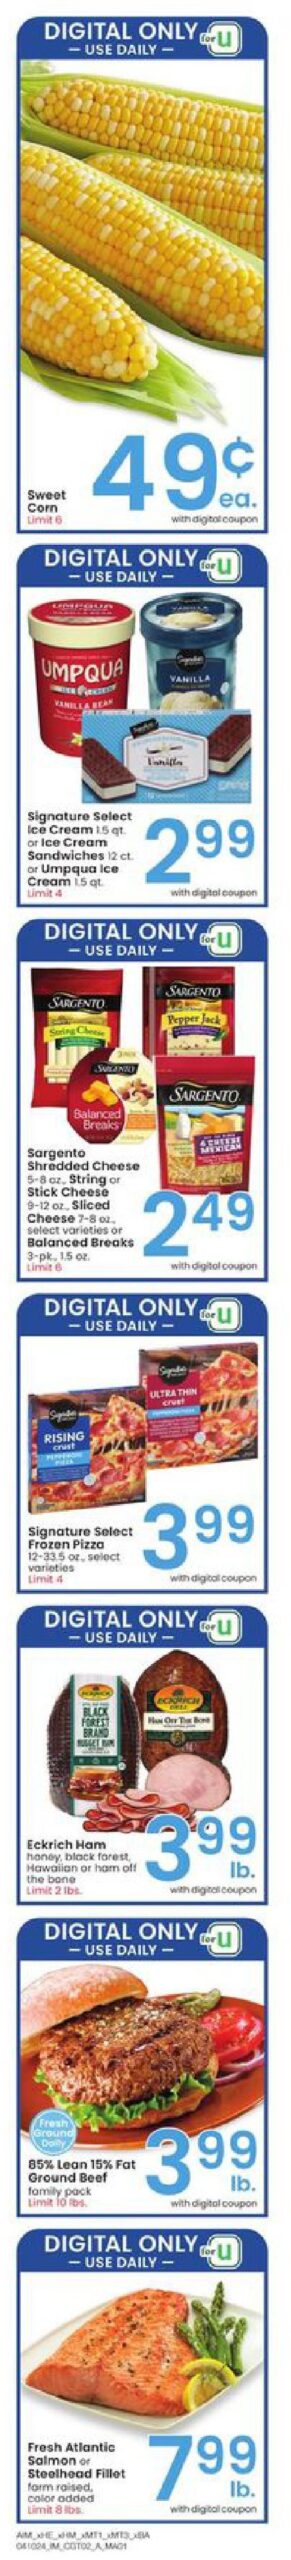 Albertsons Weekly Ad Preview 9_April_24 Page2